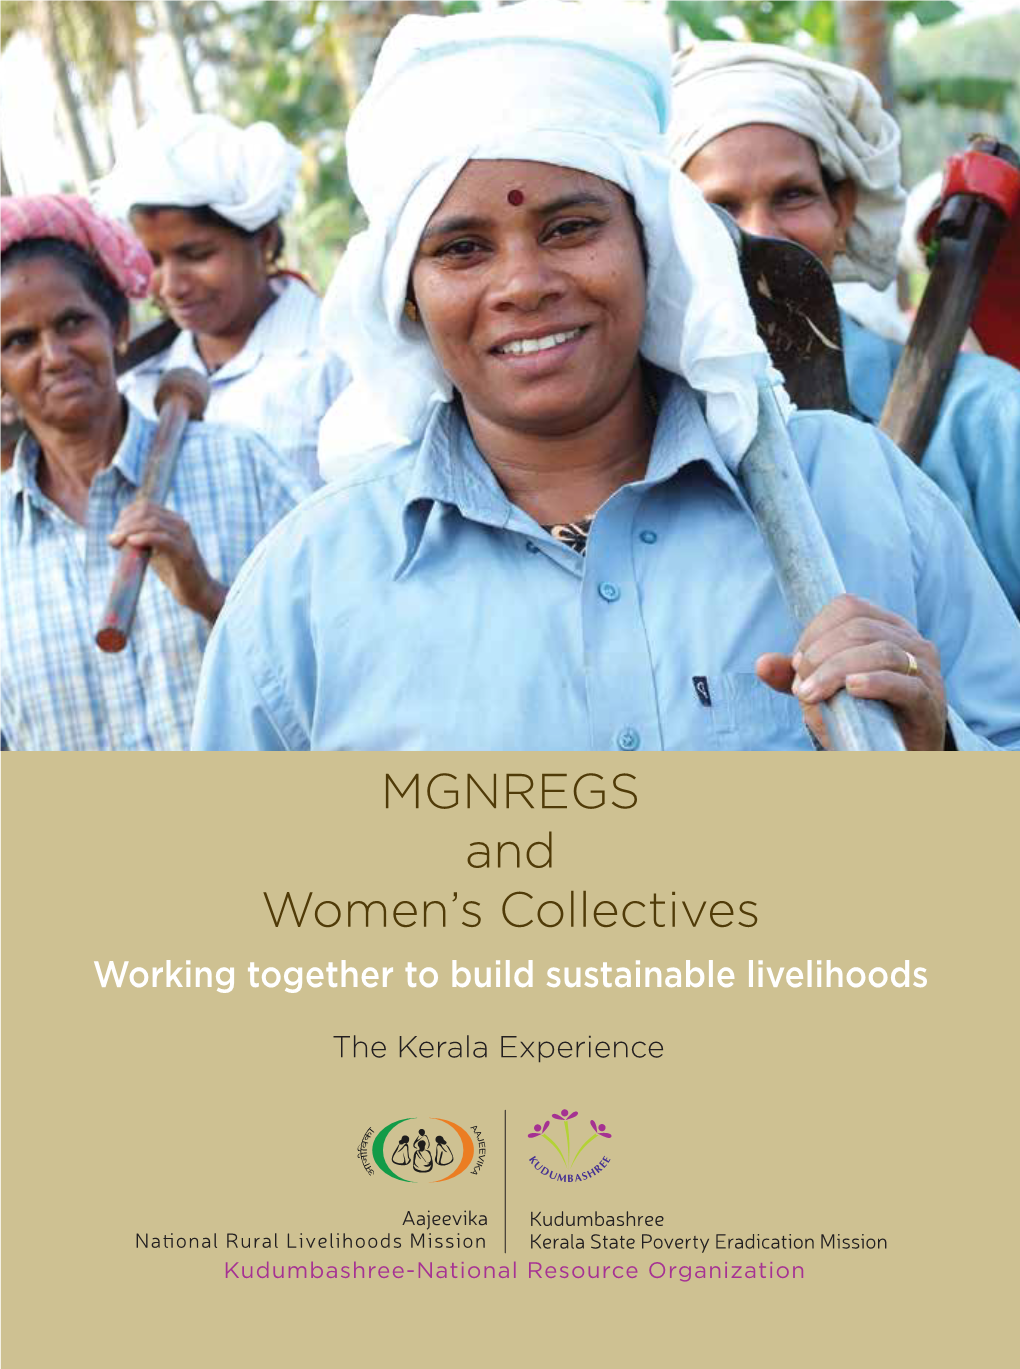 MGNREGS and Women's Collectives